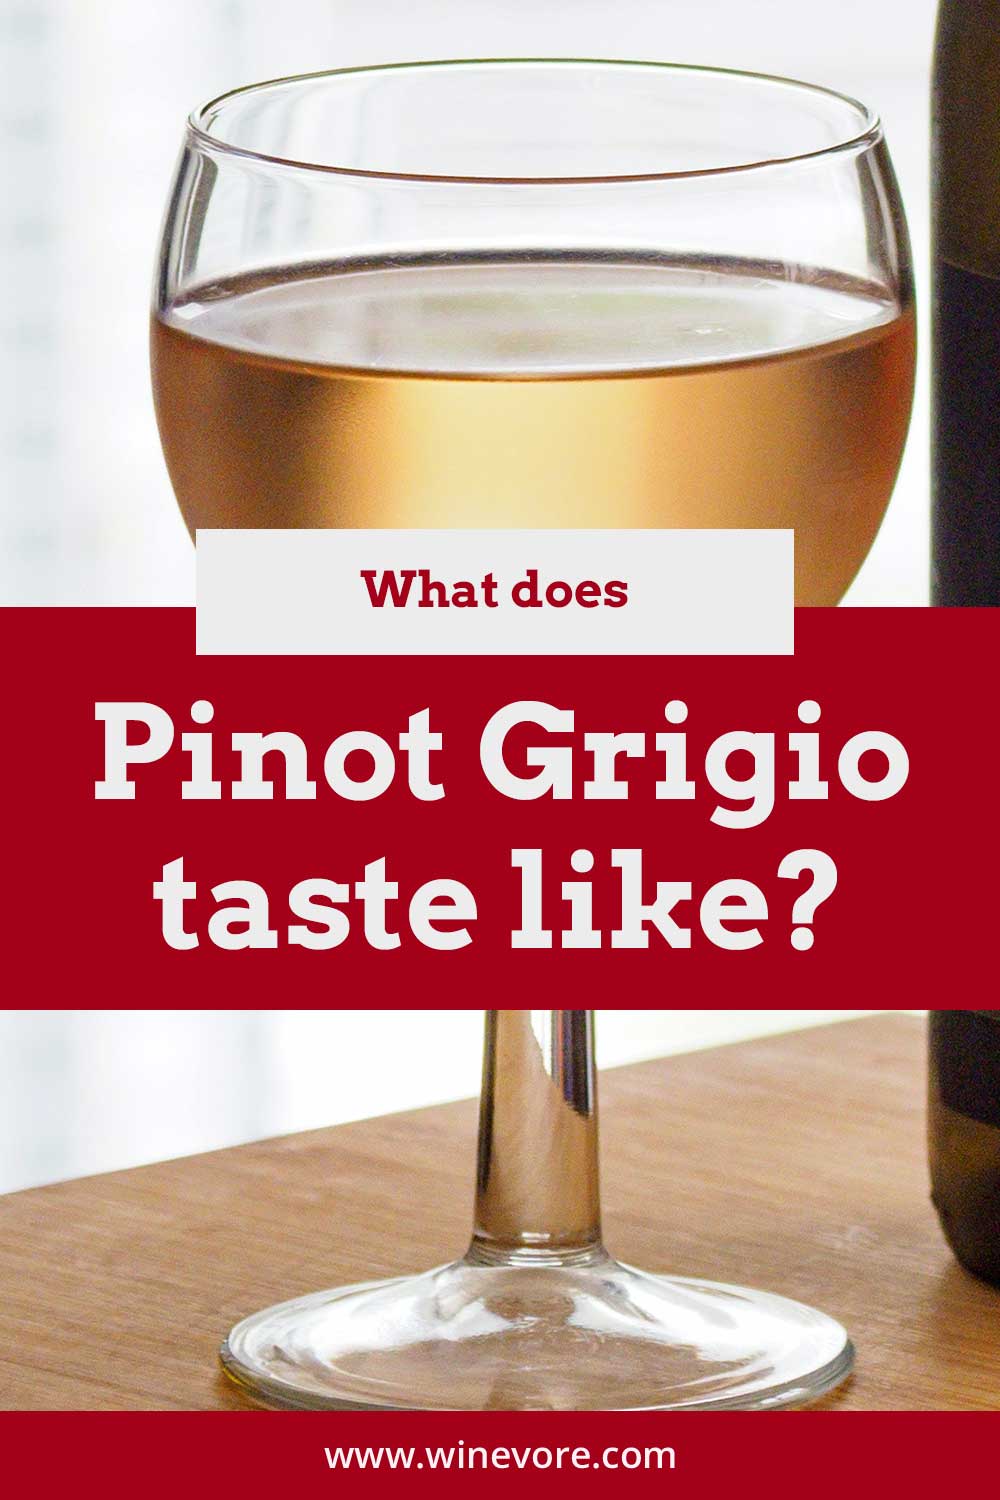 Pinot Grigio in a glass - what does it taste like?